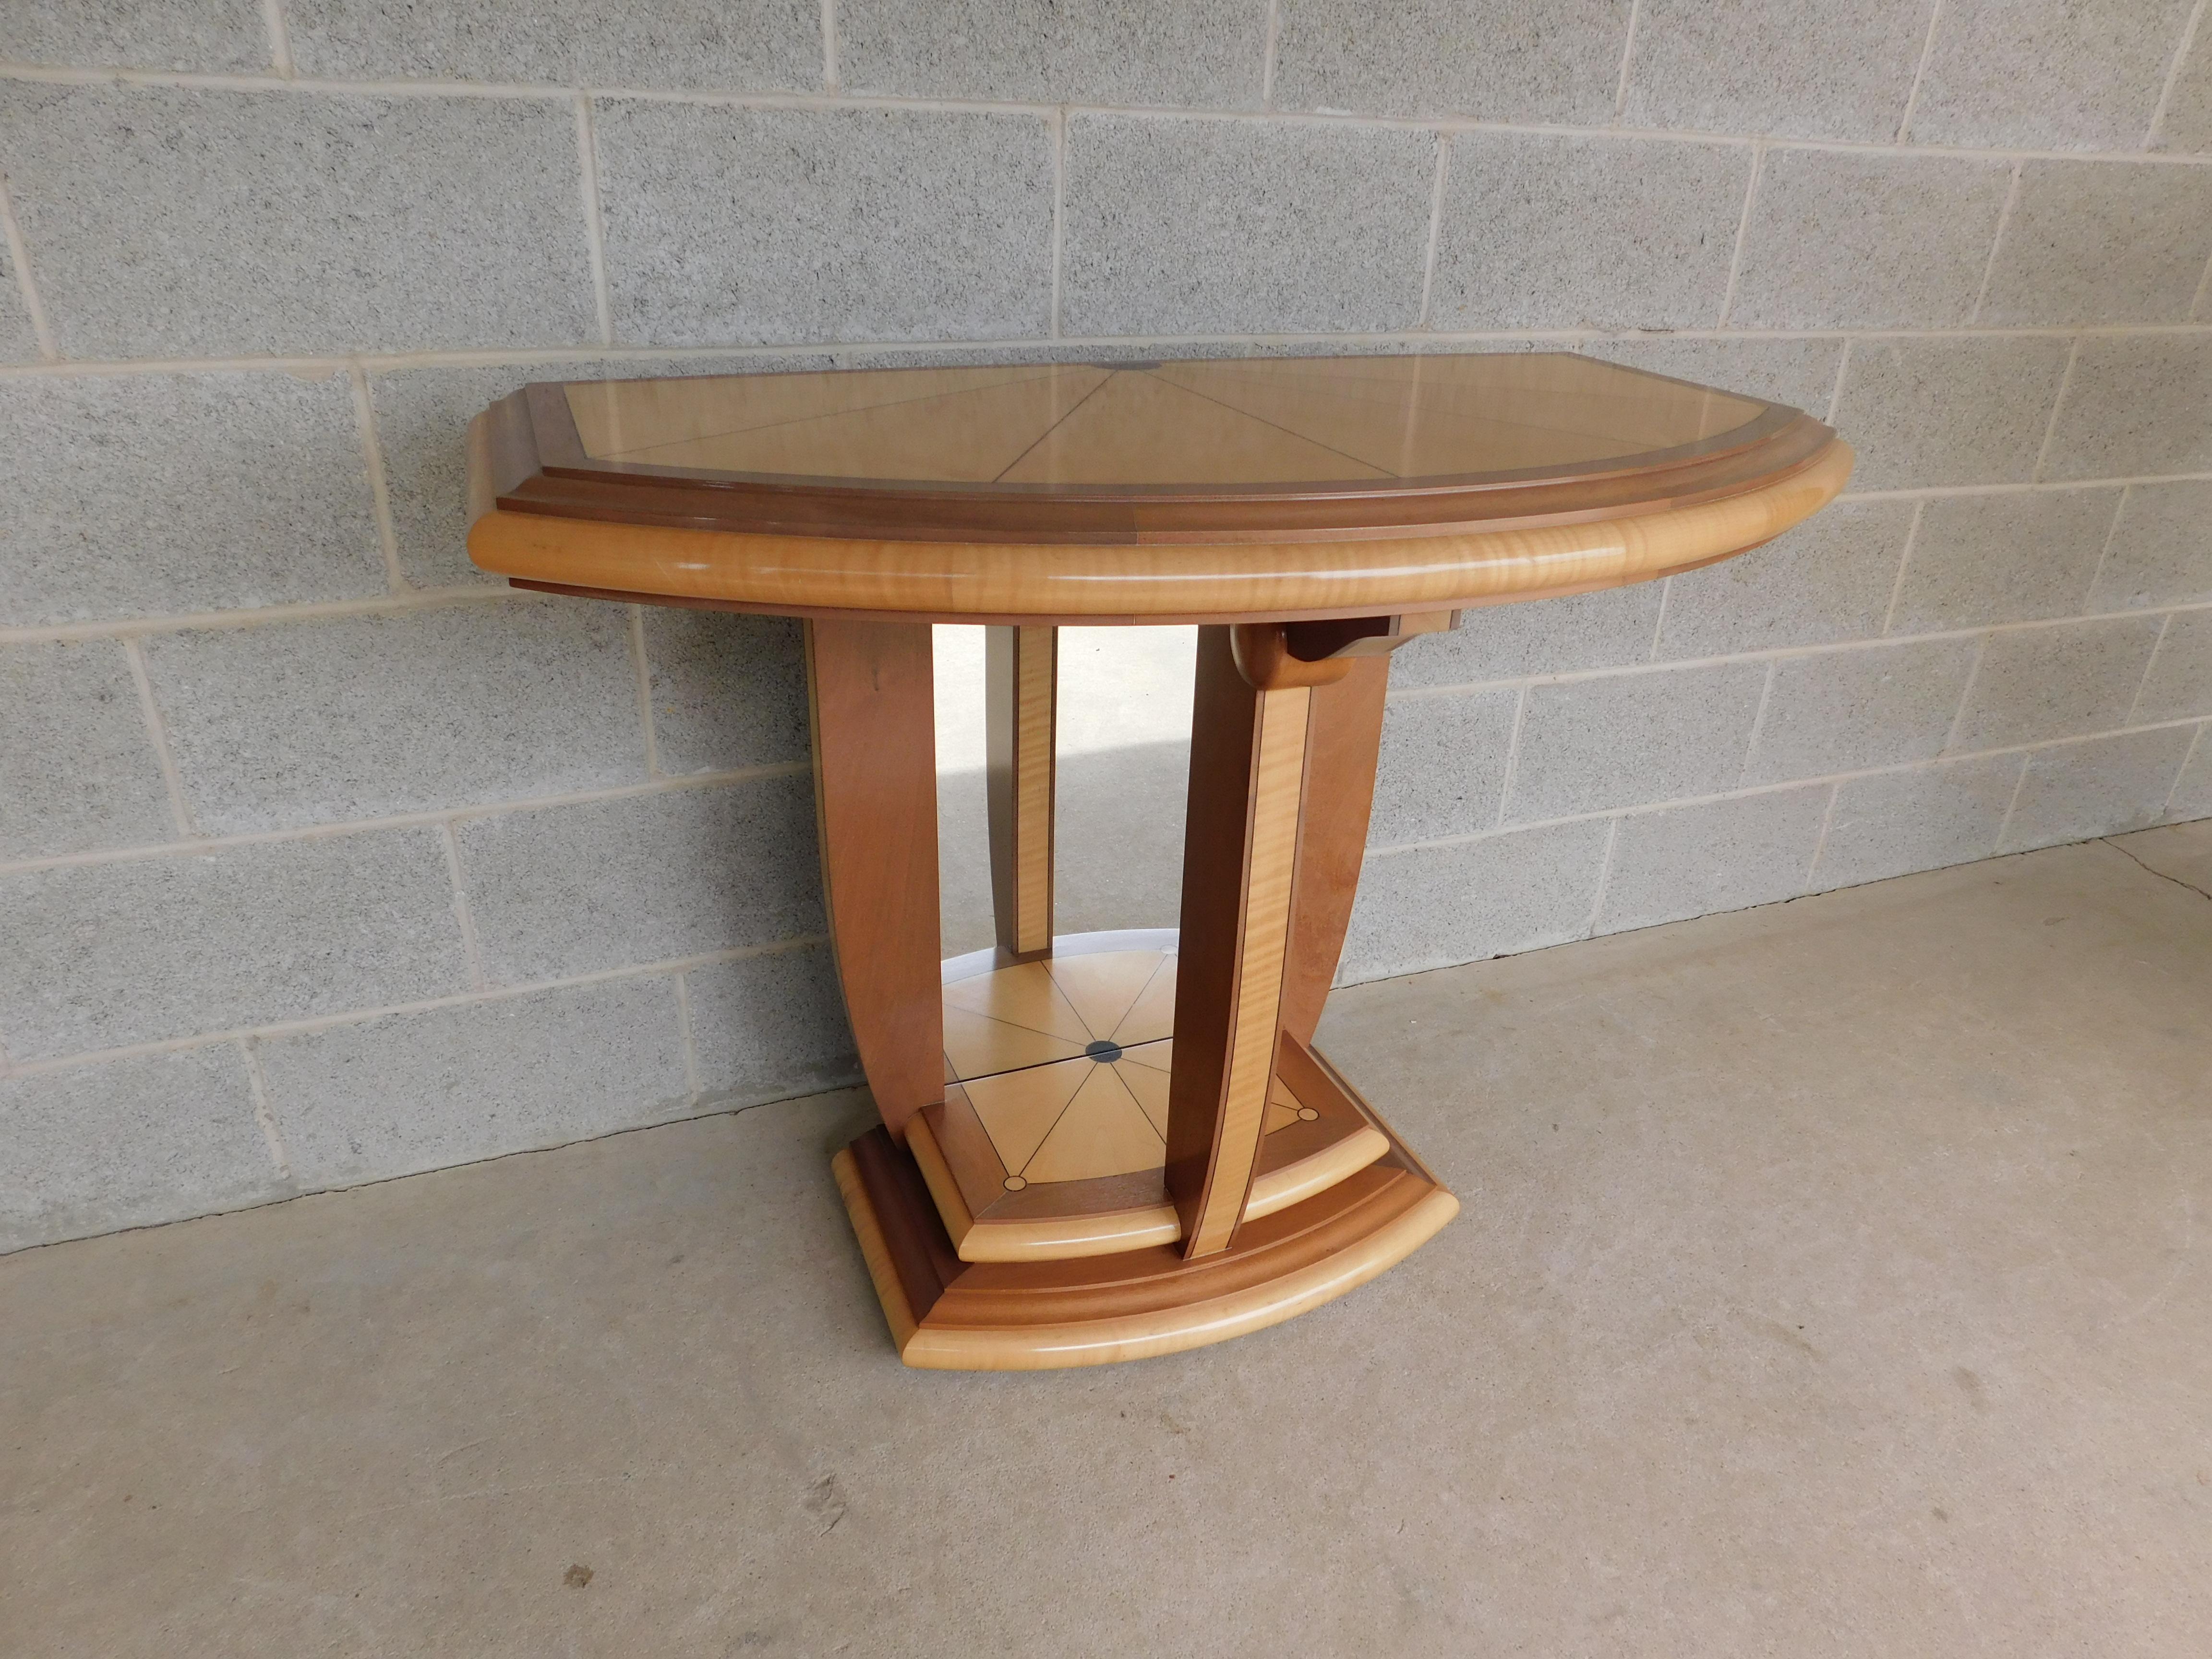 Features quality solid hand made construction - inlay details, custom finish, Art Deco-inspired design. Beautifully constructed of figured maple & exotic hardwoods the Demi style table raised on open columned mirrored backed standard and stepped